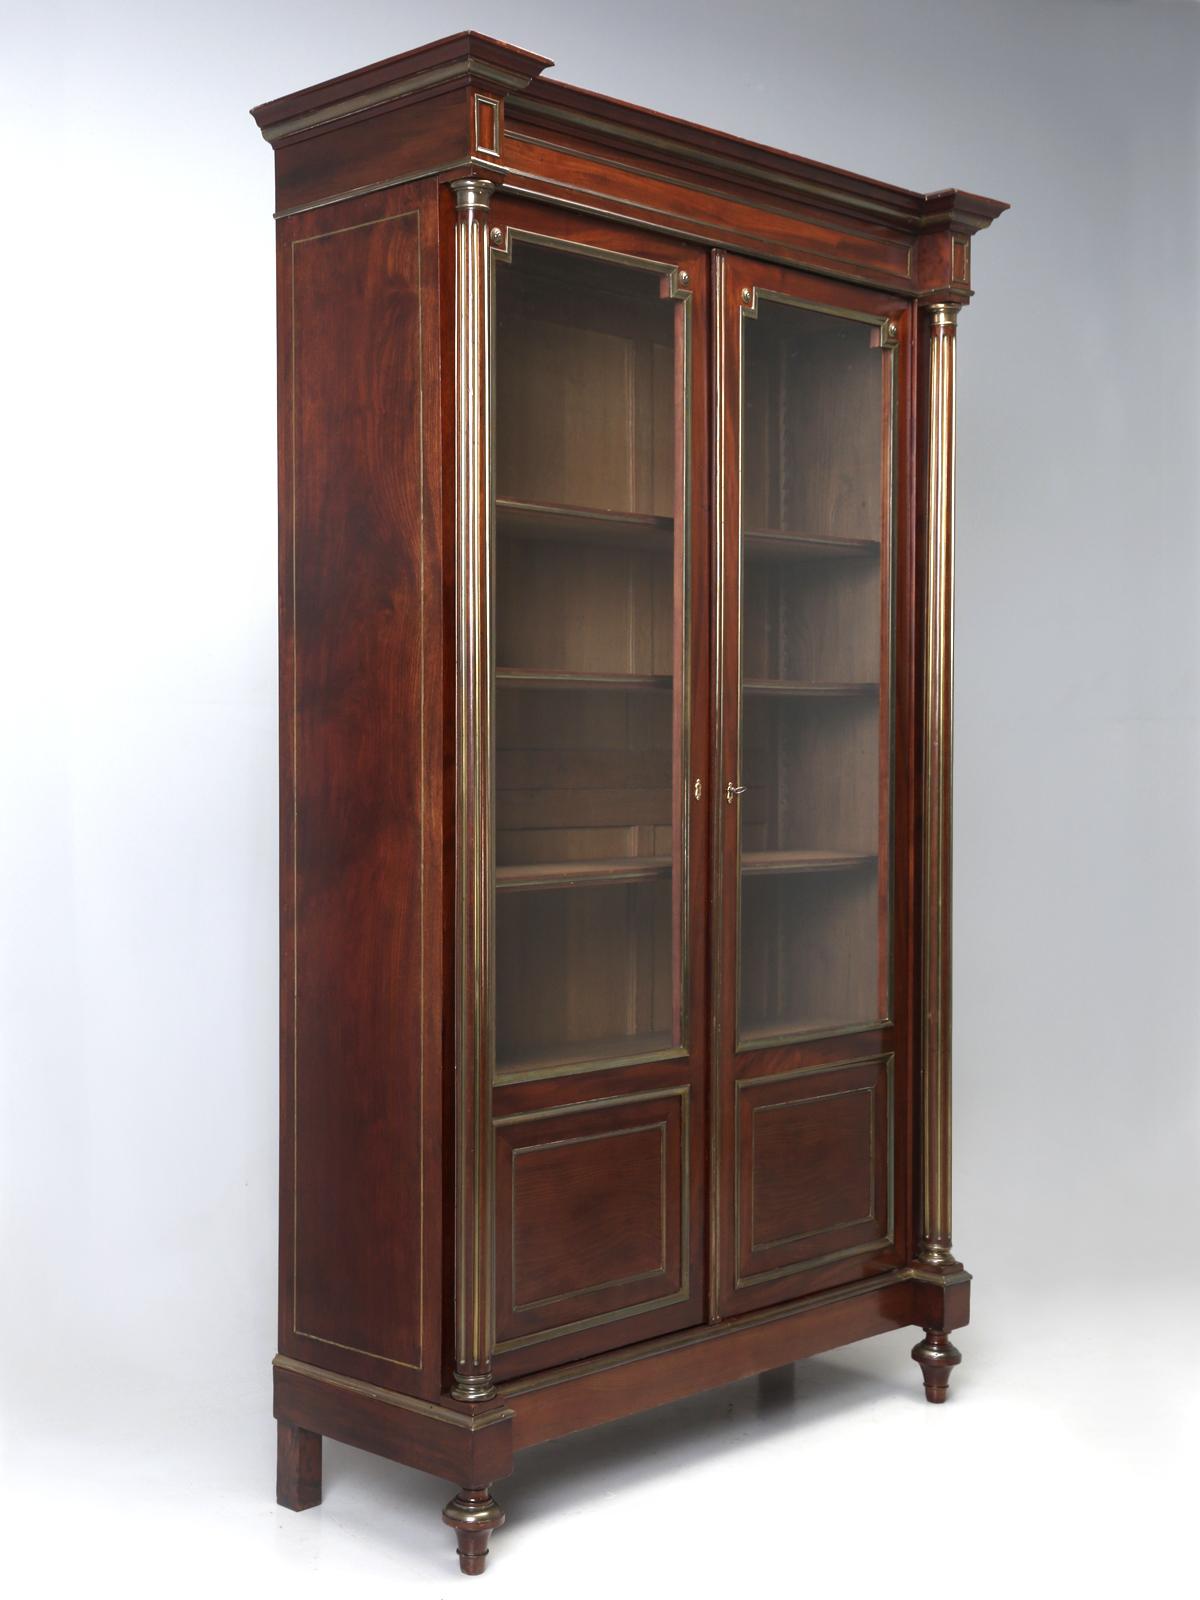 Antique French Louis XVI style mahogany and brass bookcase or bibliotheque, depending who you ask? What makes this one a little extra special, is that it required no restoration and, in our business, that is almost unheard of. This antique French